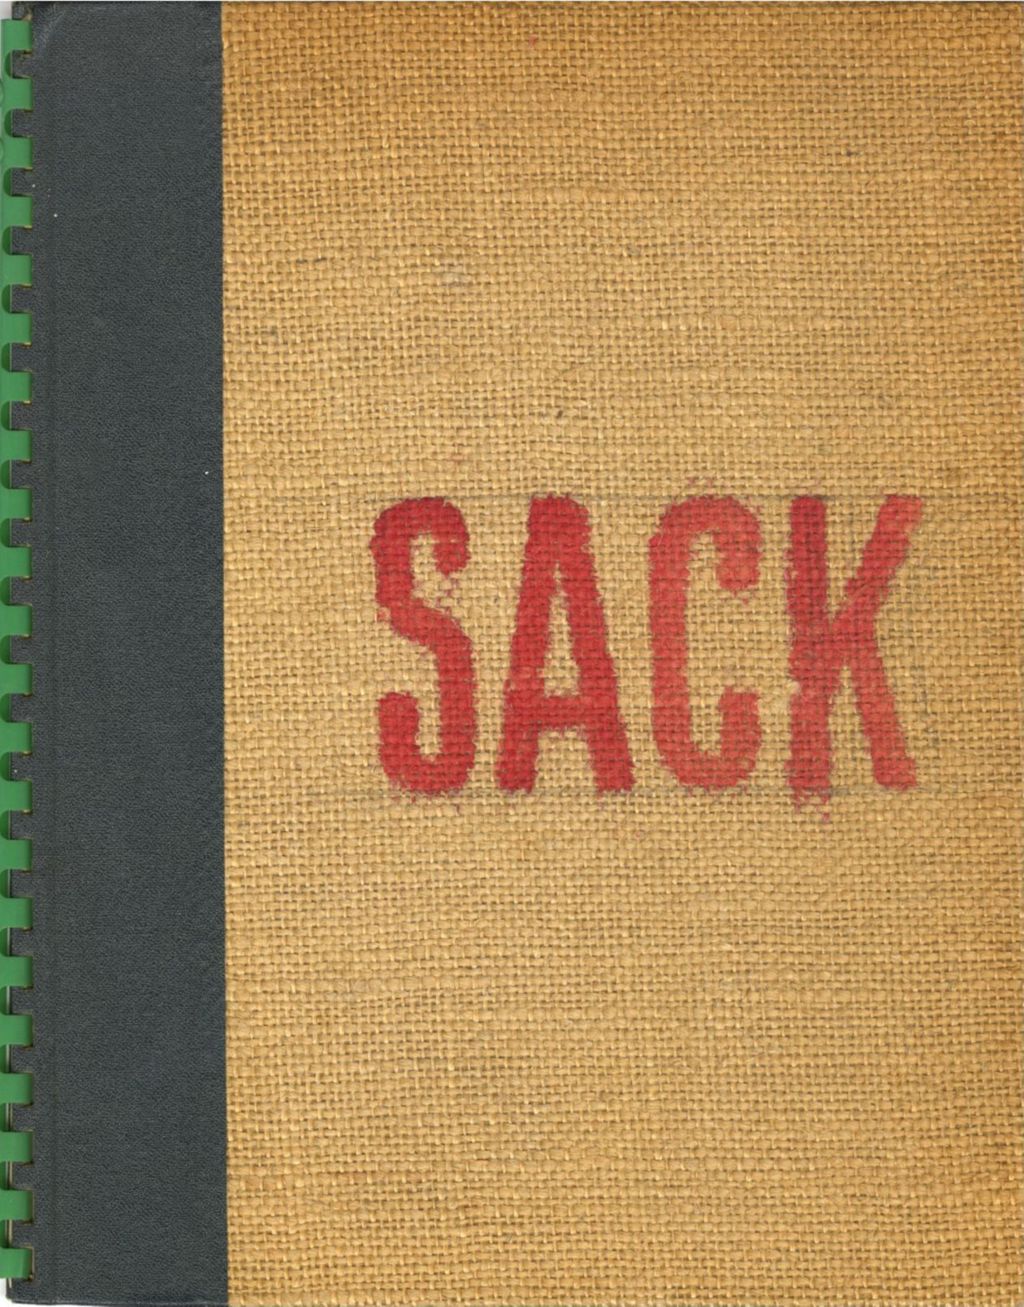 Miniature of Sack: A Study of Containers